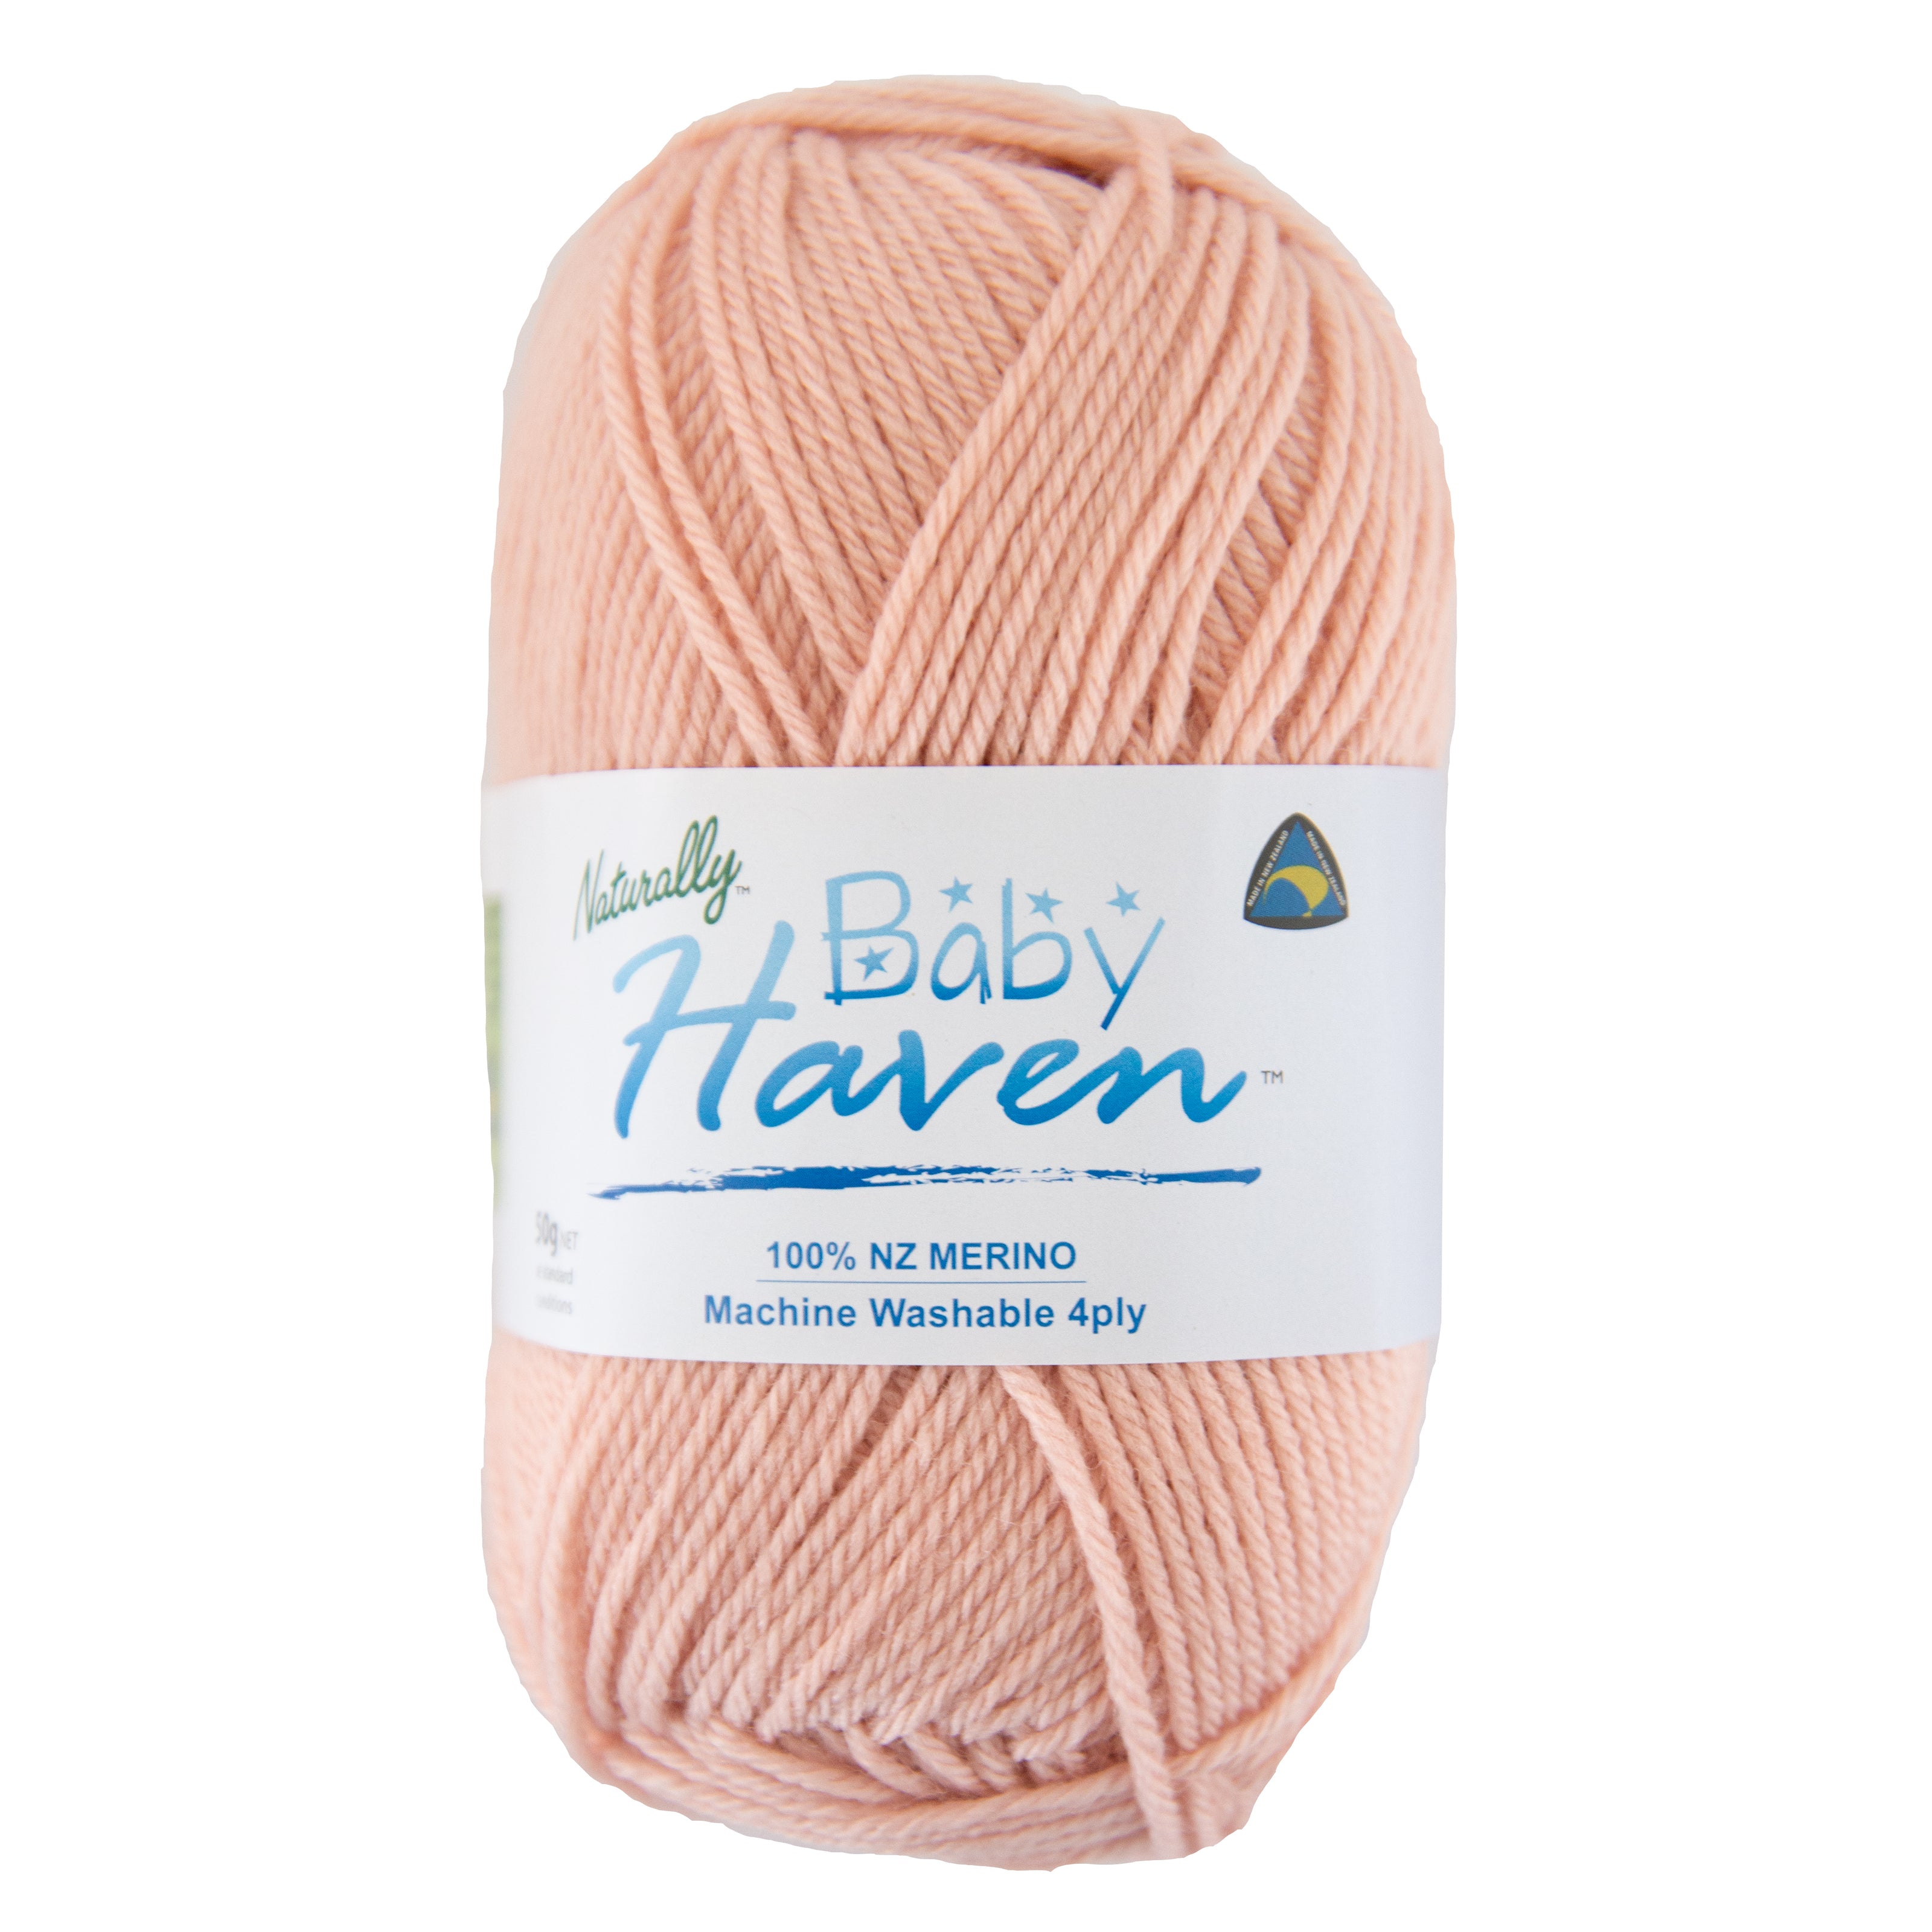 Naturally Baby Haven 4ply - 50g